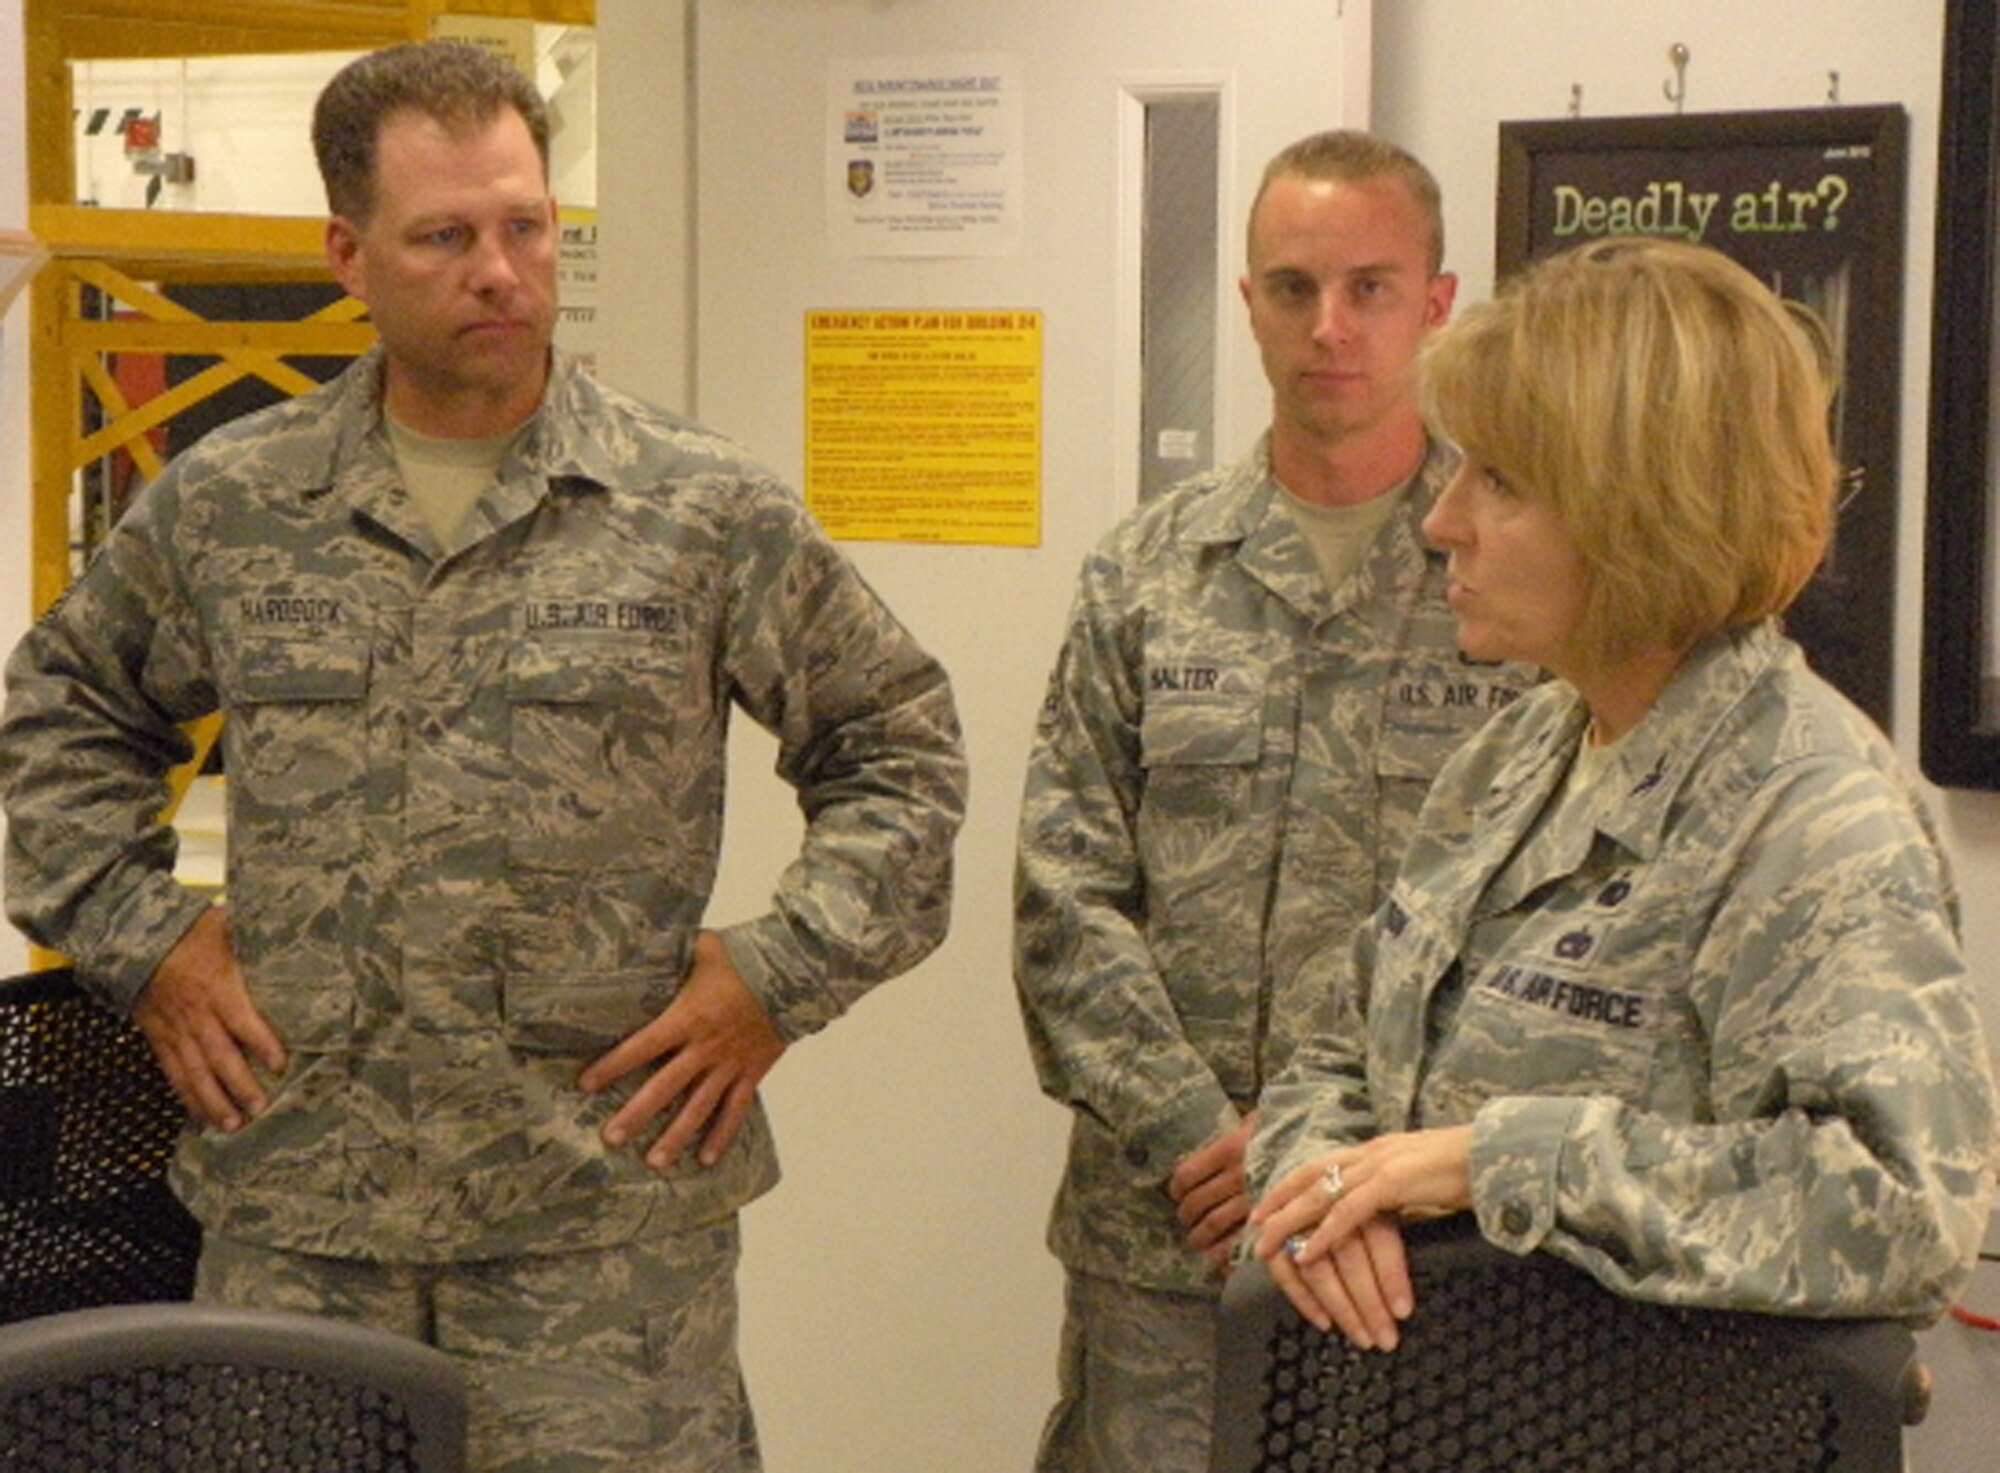 Col. Kathryn Johnson (right) talks with Air Force Reservists Master Sgt. Jeffrey Hardsock (left) and Airman 1st Class John Halter about the challenges they face working in the maintenance career field July 11 at Peterson Air Force Base, Colo. Colonel Johnson recently became the 22nd Air Force/A4 director of logistics and visited with the Airmen of the 302nd Maintenance Group to become more familiar with the organization's personnel, processes and capabilities. One of the focus items discussed during the visit was the importance of Airmen taking advantage of seasoning training opportunities to hone their maintenance skills. The 302nd MXG is a subordinate organization to the AF Reserve's 302nd Airlift Wing. Sergeant Hardsock is the 302nd Maintenance Squadron isochronal maintenance dock section chief, while Airman Halter is an aircraft inspector in the same section. (U.S. Air Force photo/Senior Airman April Migliore) 